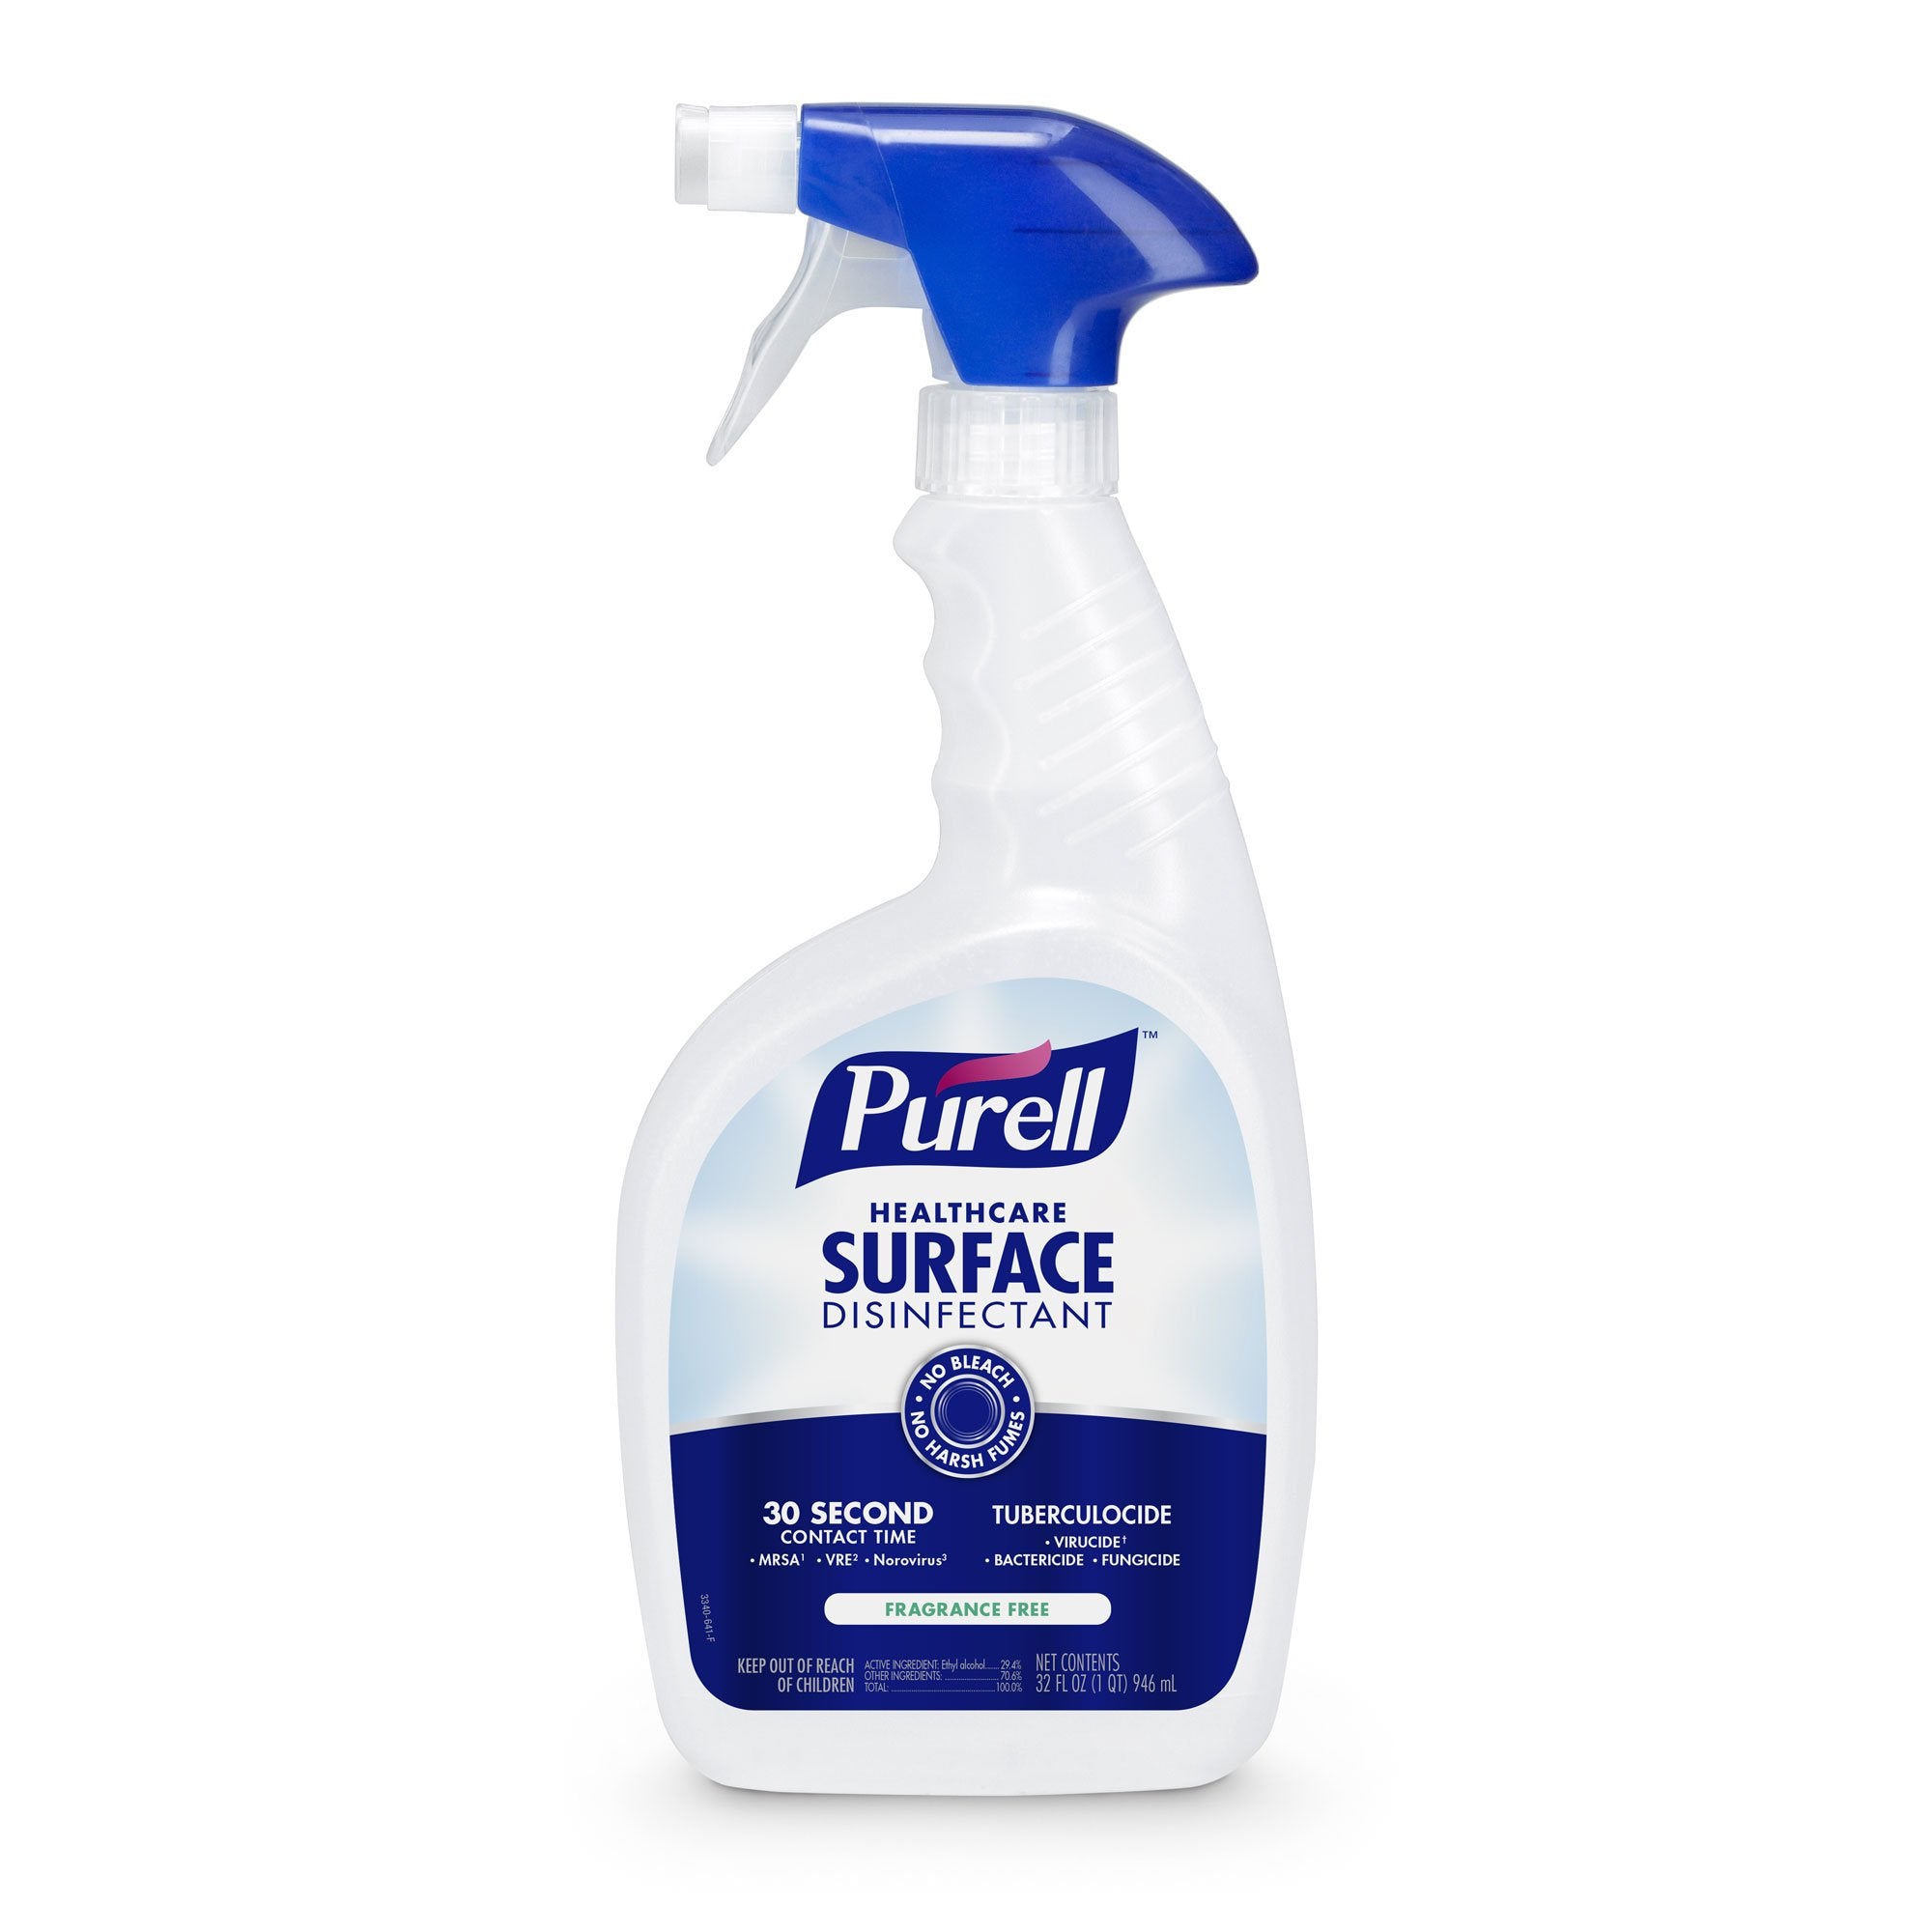 Purell® Surface Disinfectant Cleaner Alcohol Based Pump Spray Liquid 32 oz. Bottle Alcohol Scent NonSterile